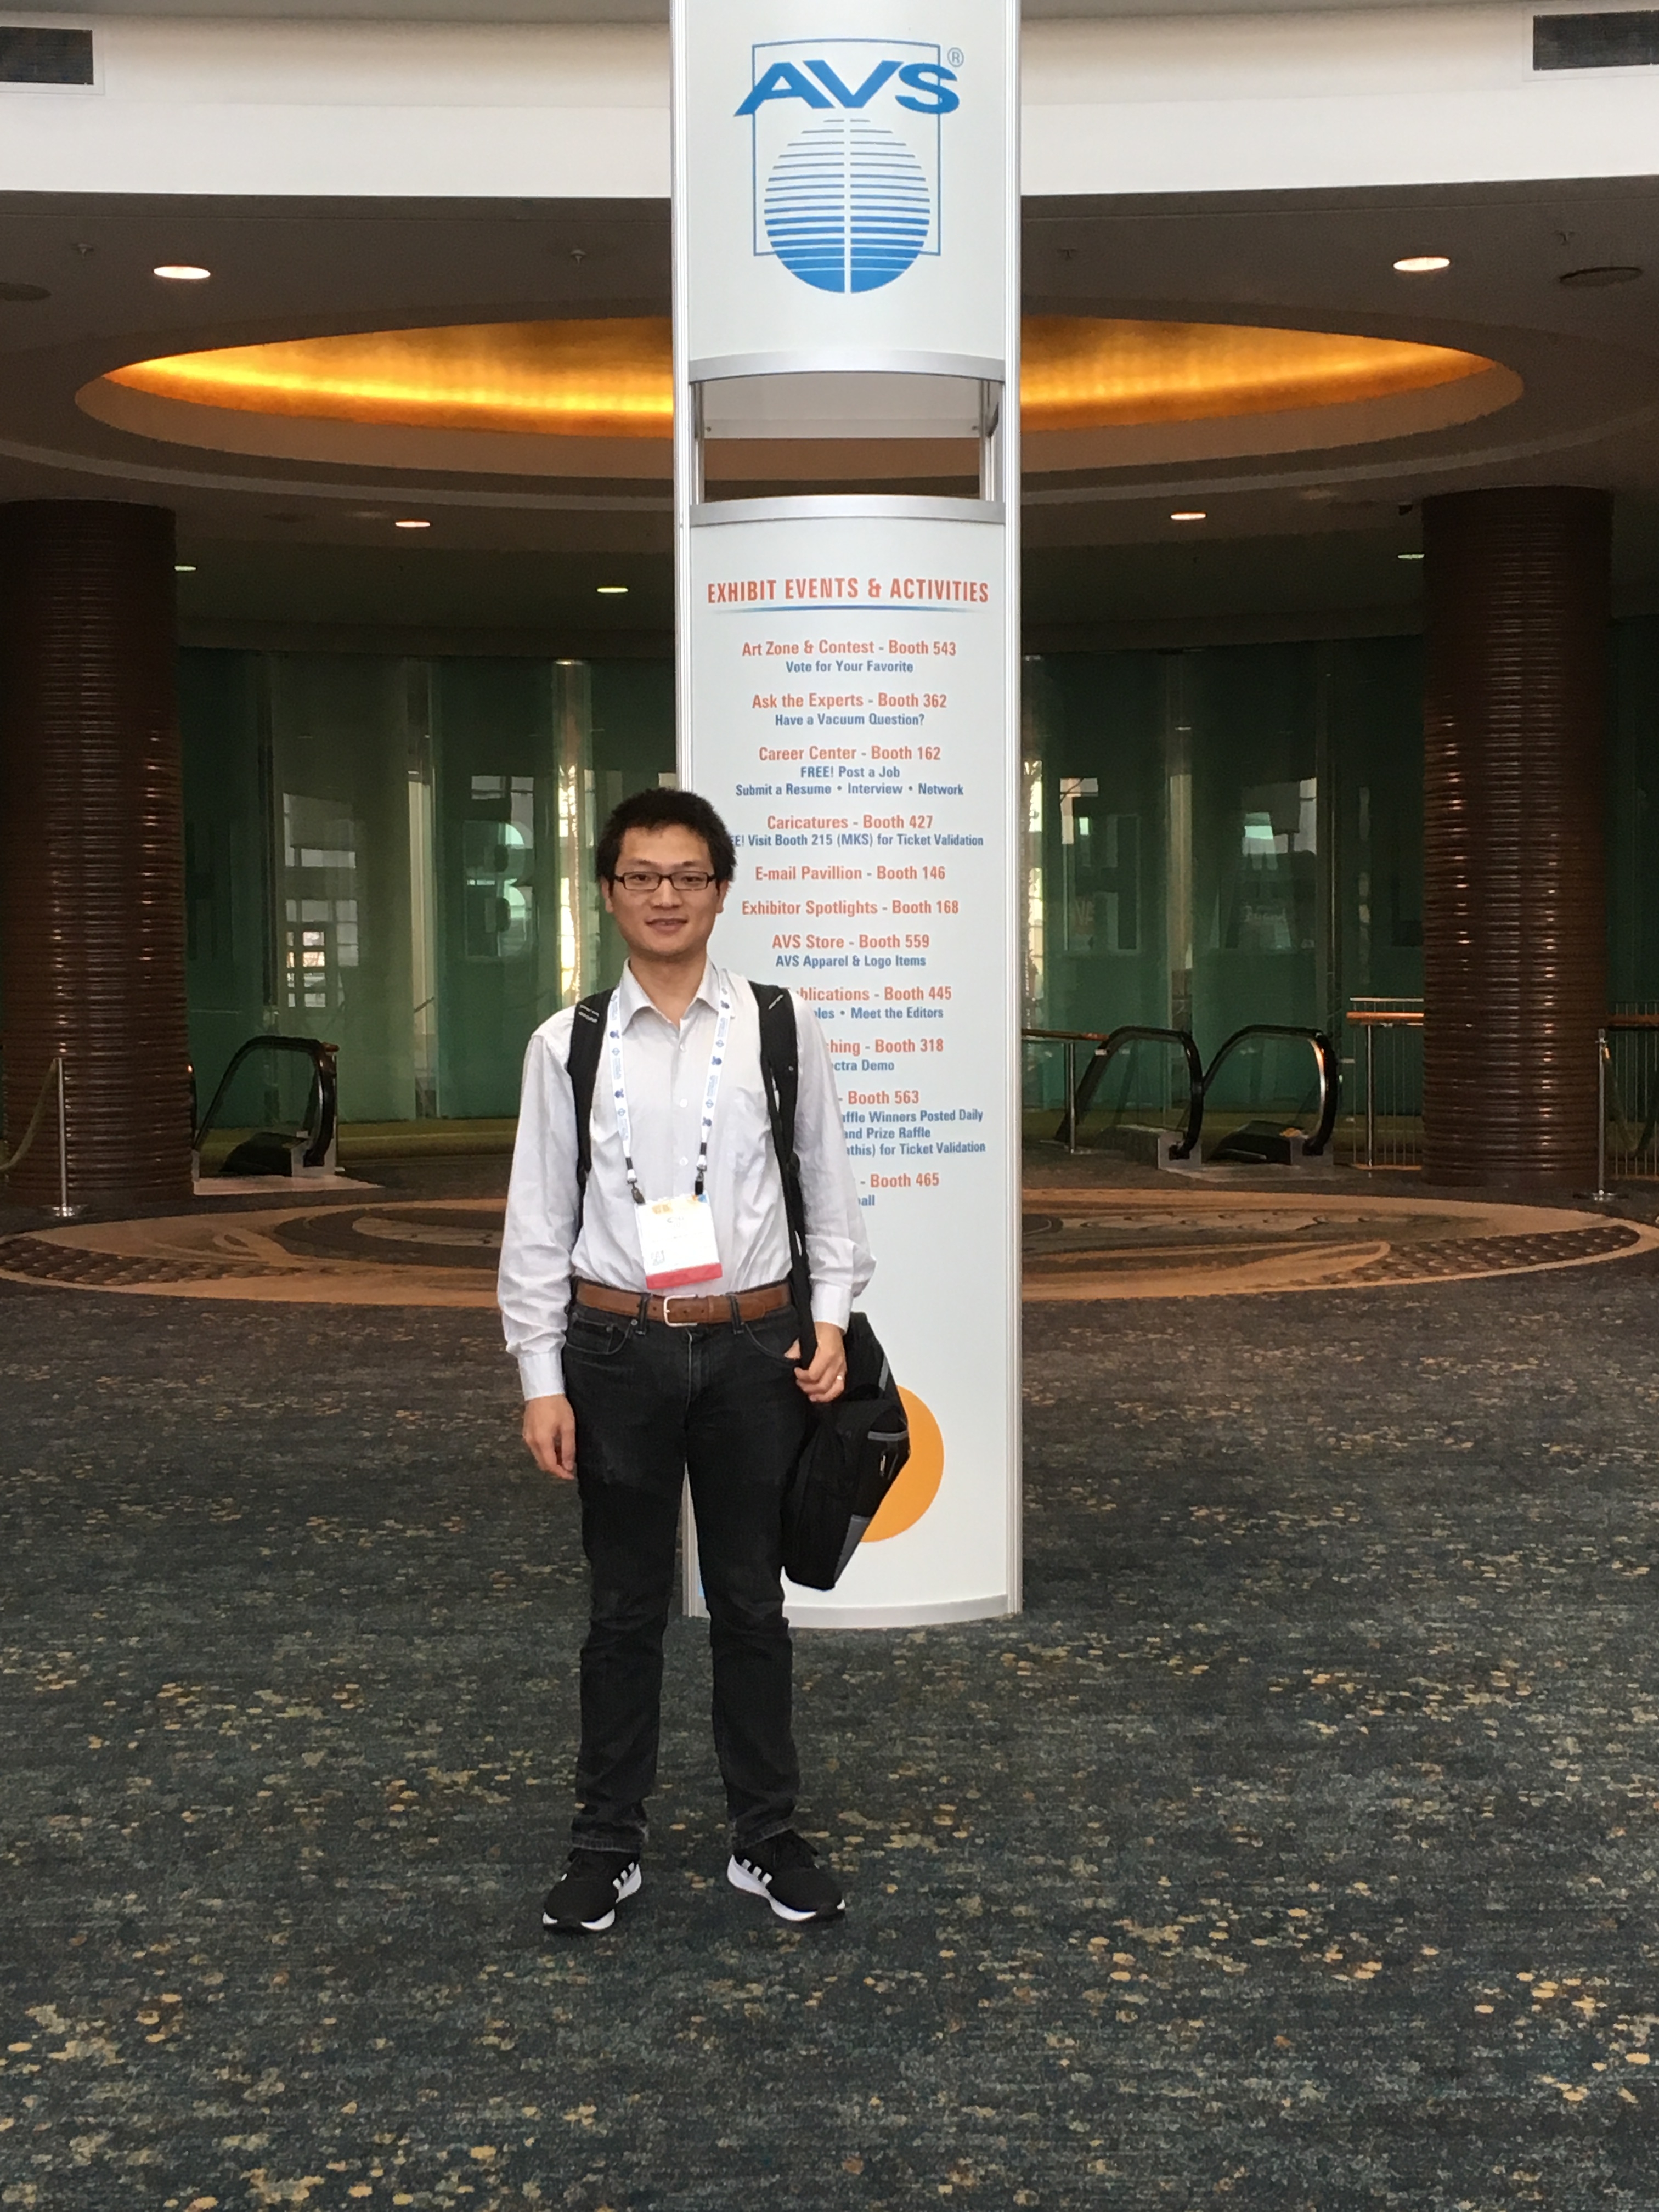 Qing poses near the schedule for the AVS symposium.